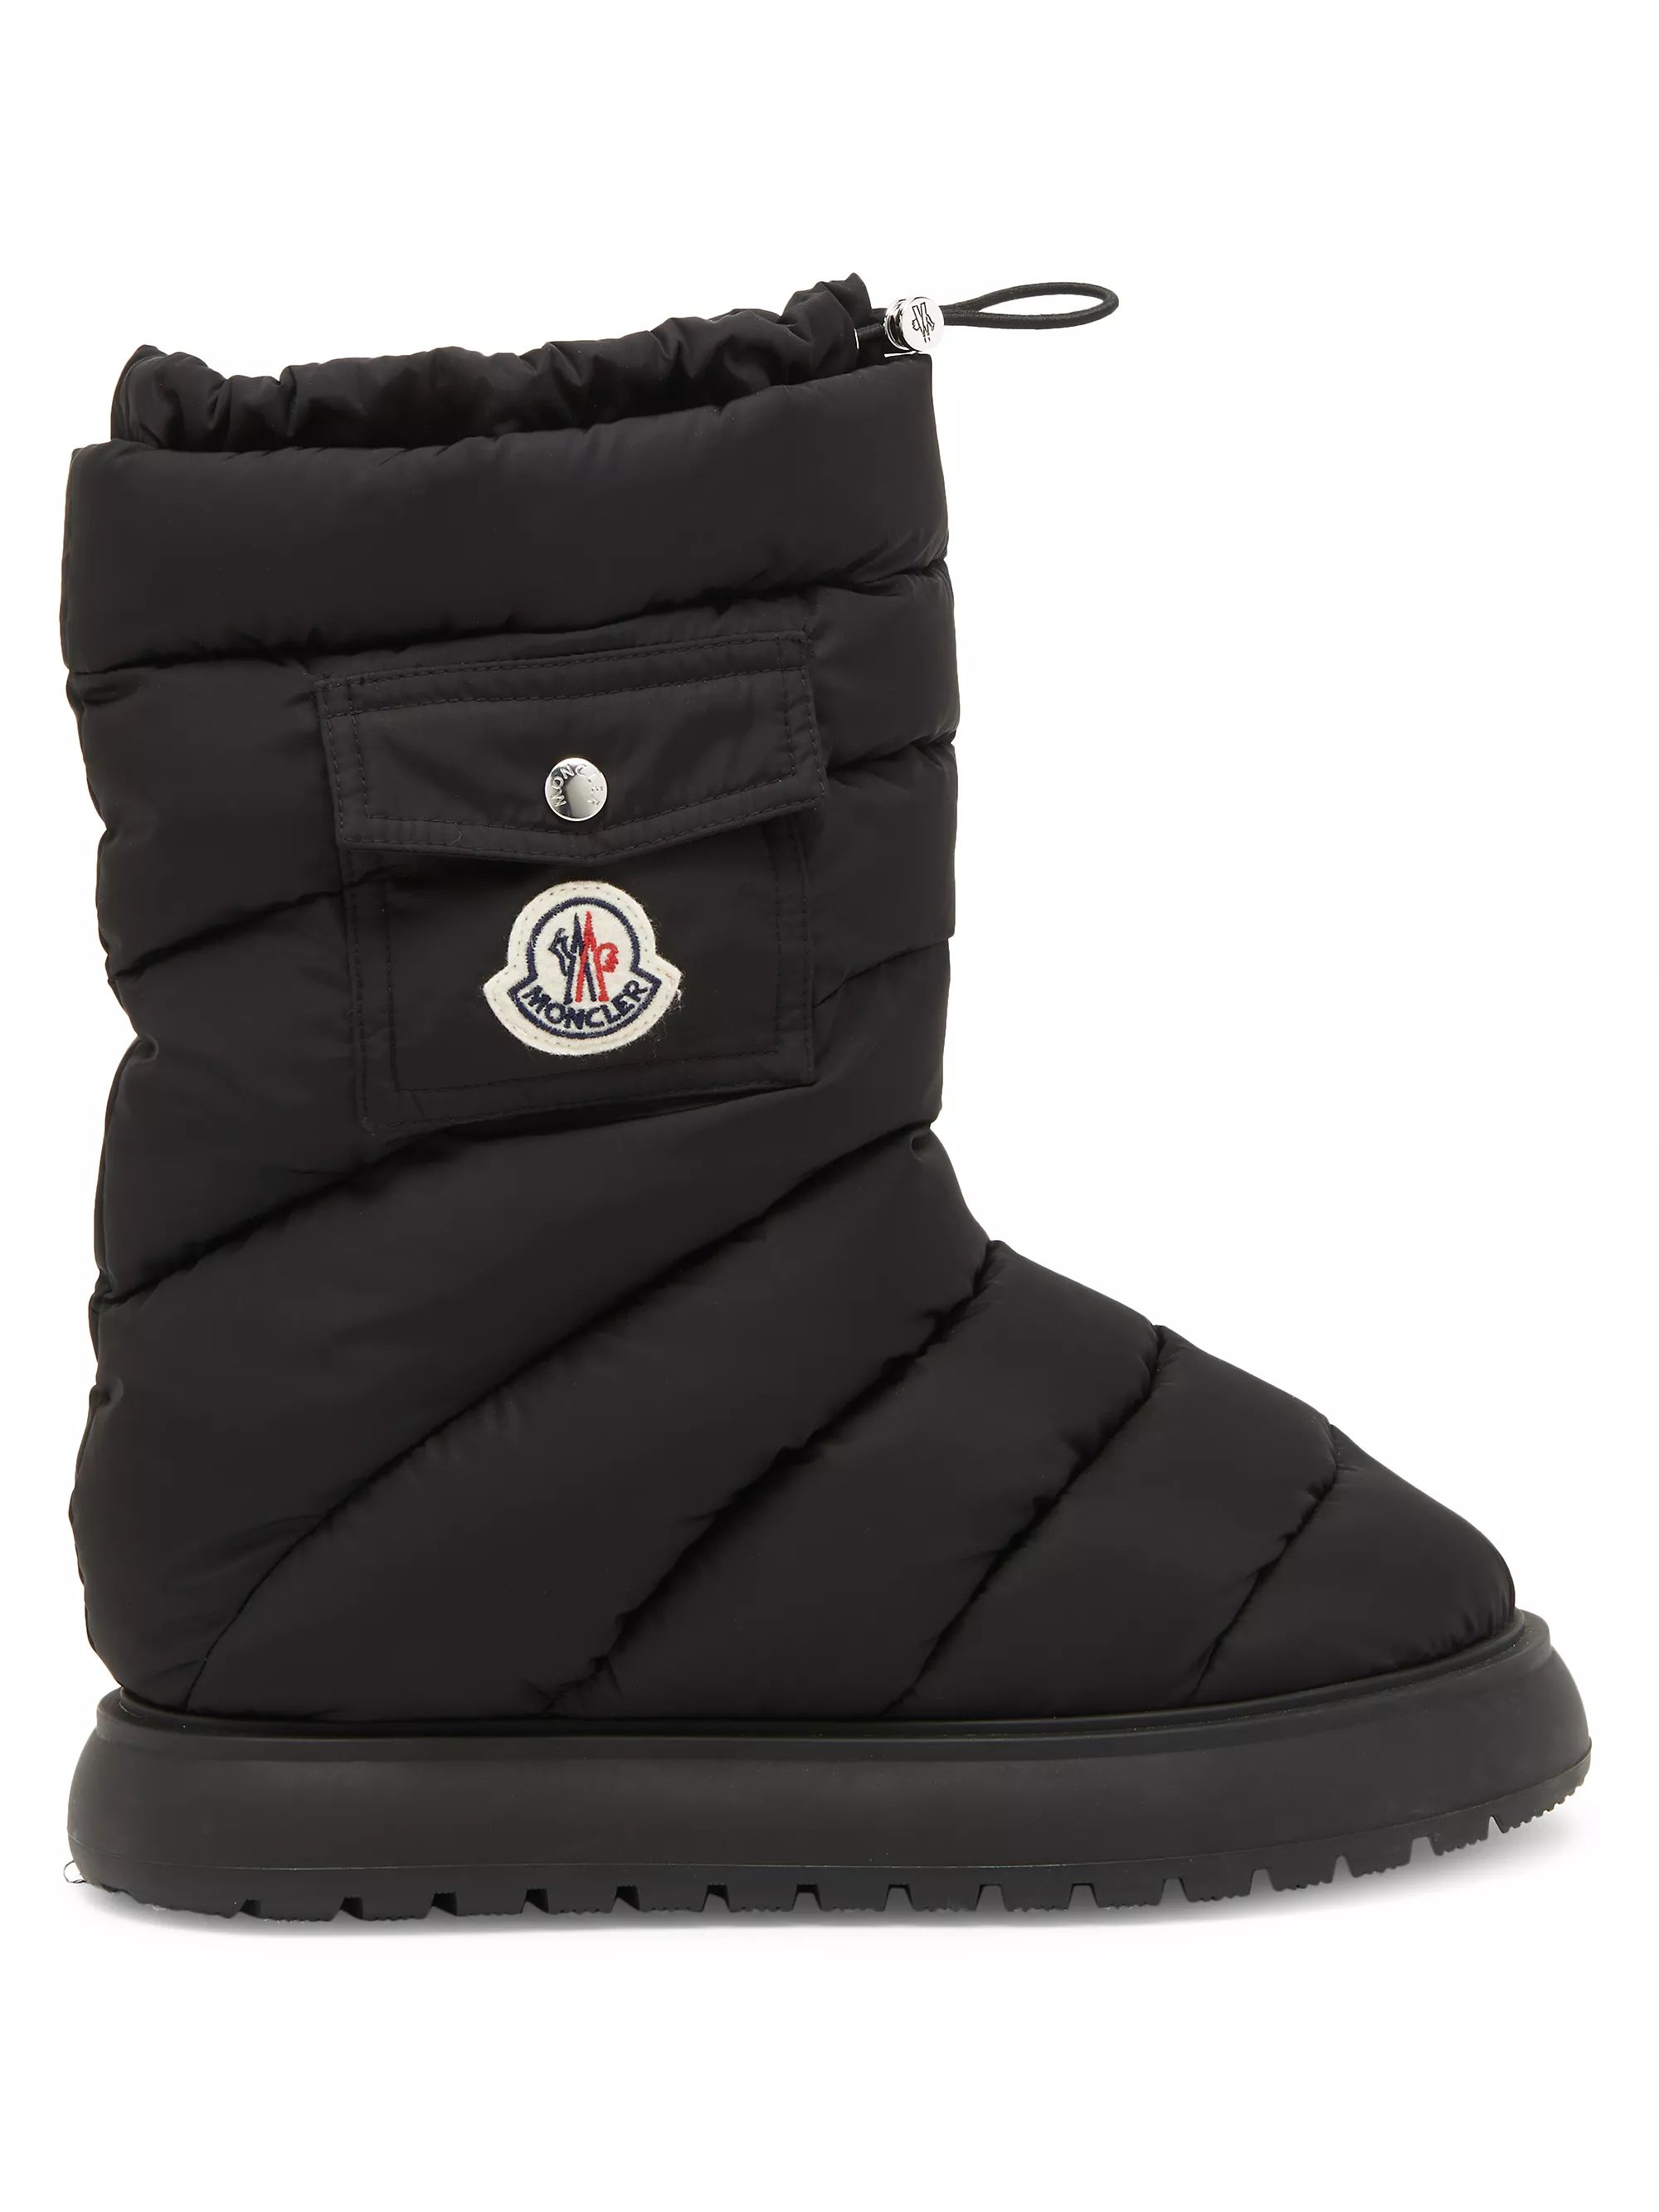 Gaia Pocket Puffer Snow Boots | Saks Fifth Avenue